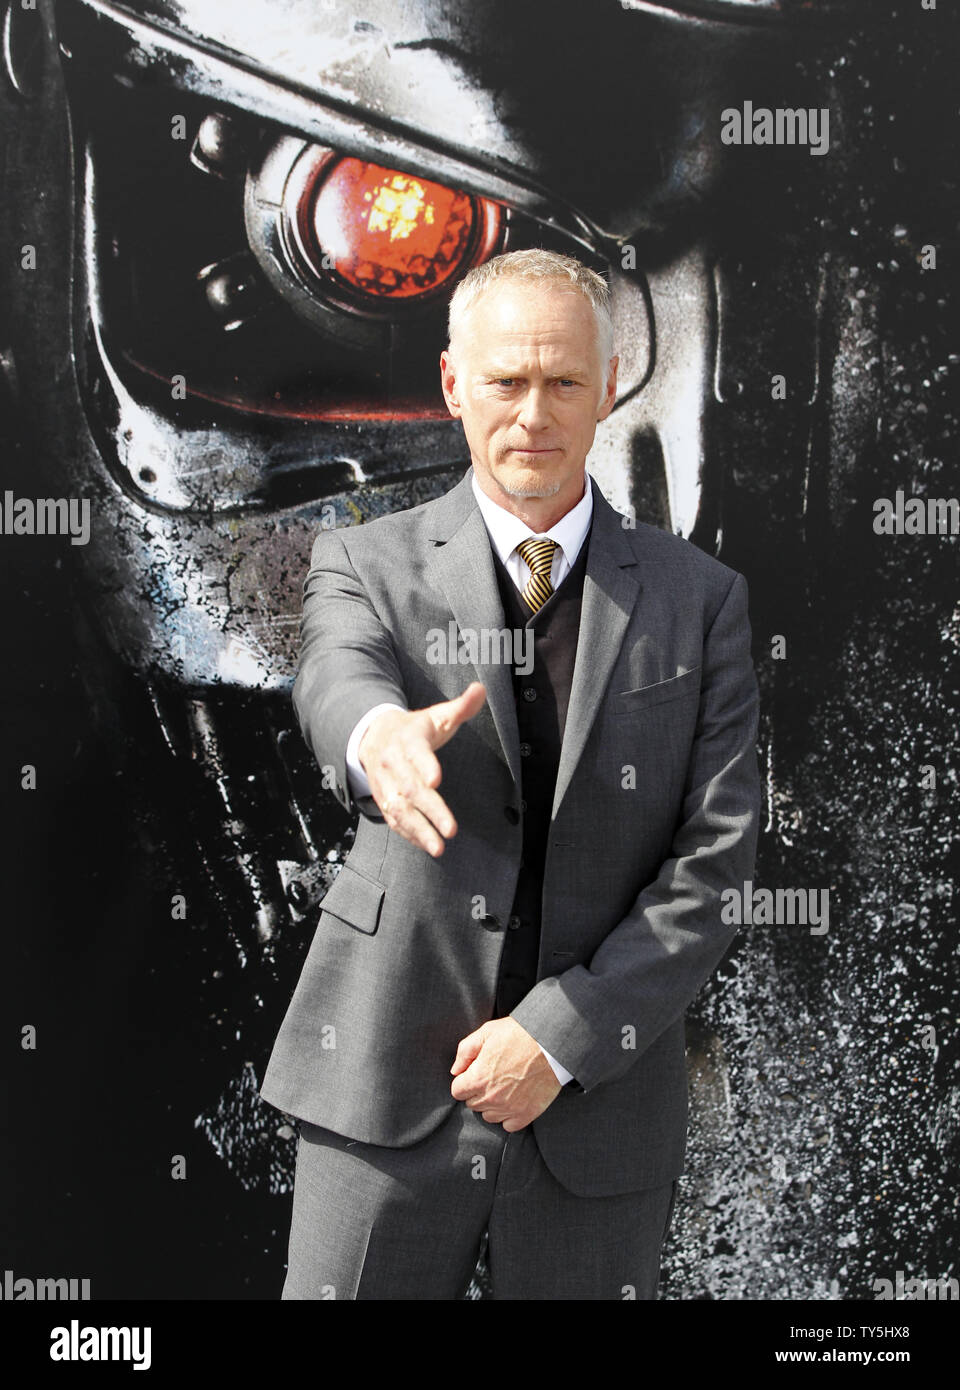 Director Alan Taylor attends the premiere of the motion picture sci-fi thriller ' Terminator Genisys' at the Dolby Theatre in the Hollywood section of Los Angeles on June 28, 2015. Storyline: When John Connor, leader of the human resistance, sends Sgt. Kyle Reese back to 1984 to protect Sarah Connor and safeguard the future, an unexpected turn of events creates a fractured timeline. Now, Sgt. Reese finds himself in a new and unfamiliar version of the past, where he is faced with unlikely allies, including the Guardian (Arnold Schwarzenegger), dangerous new enemies, and an unexpected new missio Stock Photo